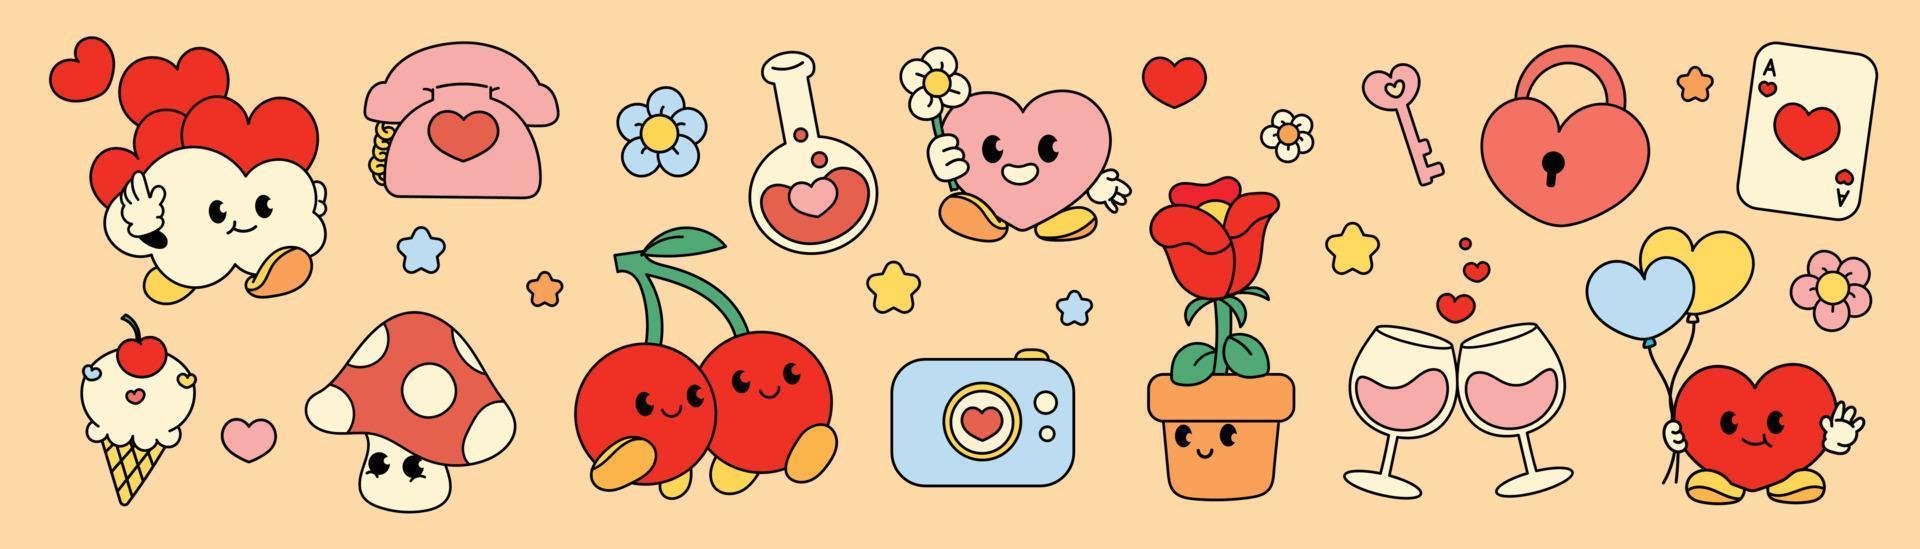 70s groovy doodle element vector set. Cute comic retro hippie collection of hearts, telephone, flowers, wine glasses, cherry, mushroom, potion. Design for valentine card, decorative, sticker, print.